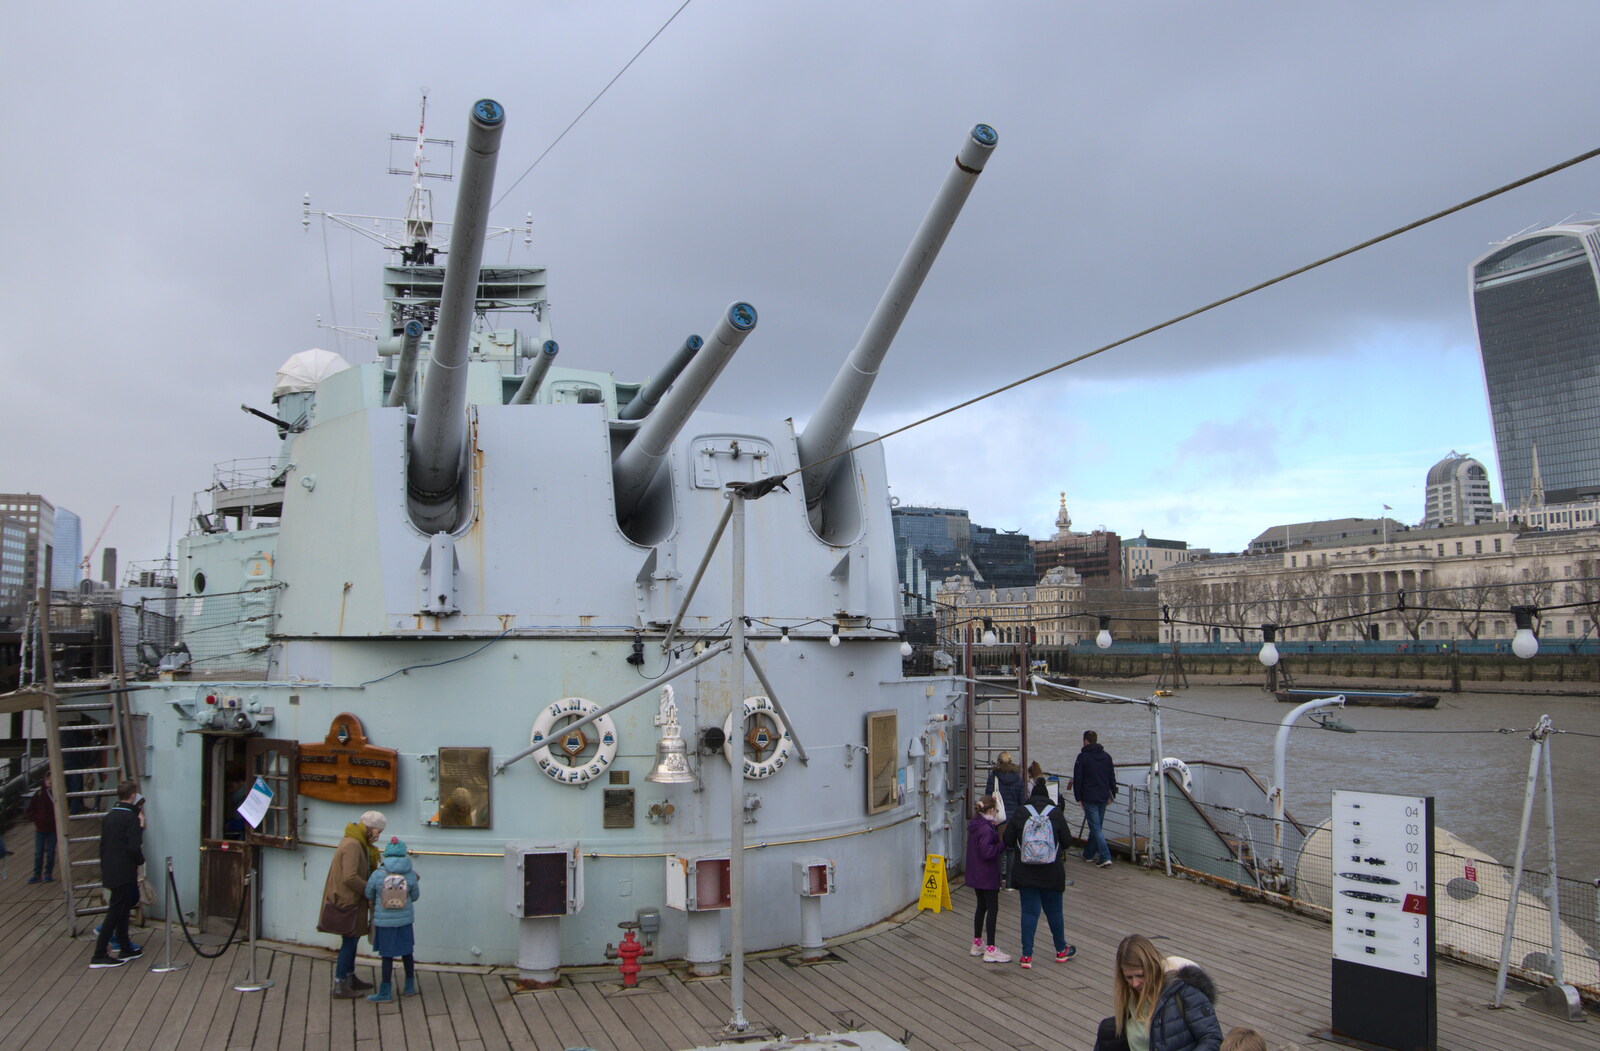 The Belfast's foreward 6' guns from HMS Belfast and the South Bank, Southwark, London - 17th February 2020